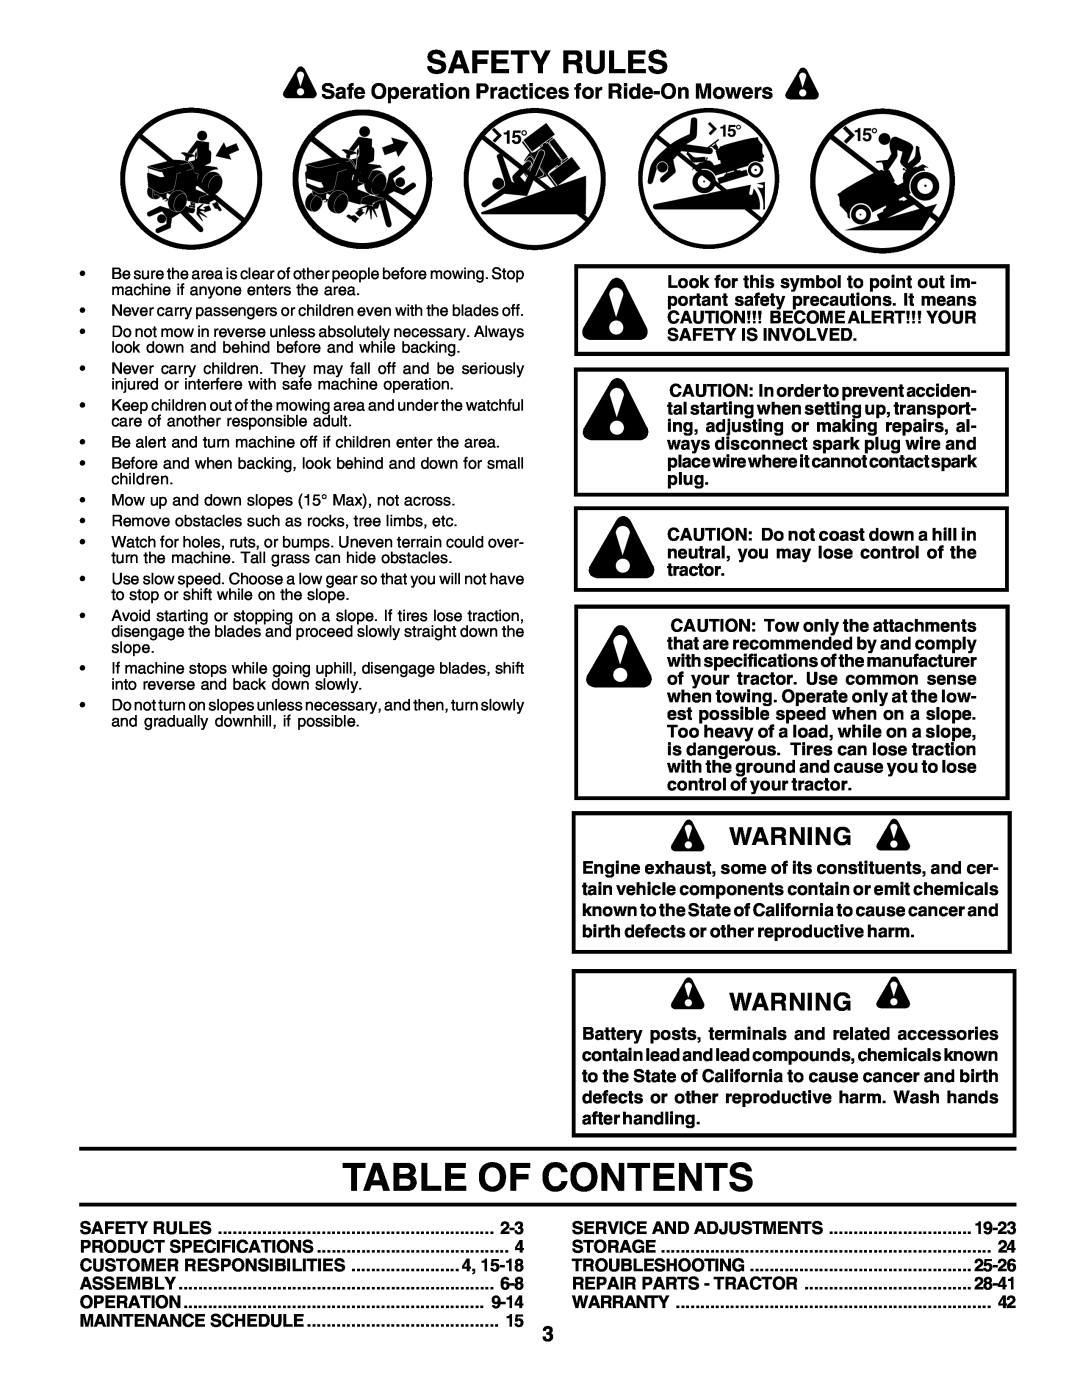 Weed Eater S165H42D Table Of Contents, Safety Rules, Safe Operation Practices for Ride-On Mowers, Product Specifications 